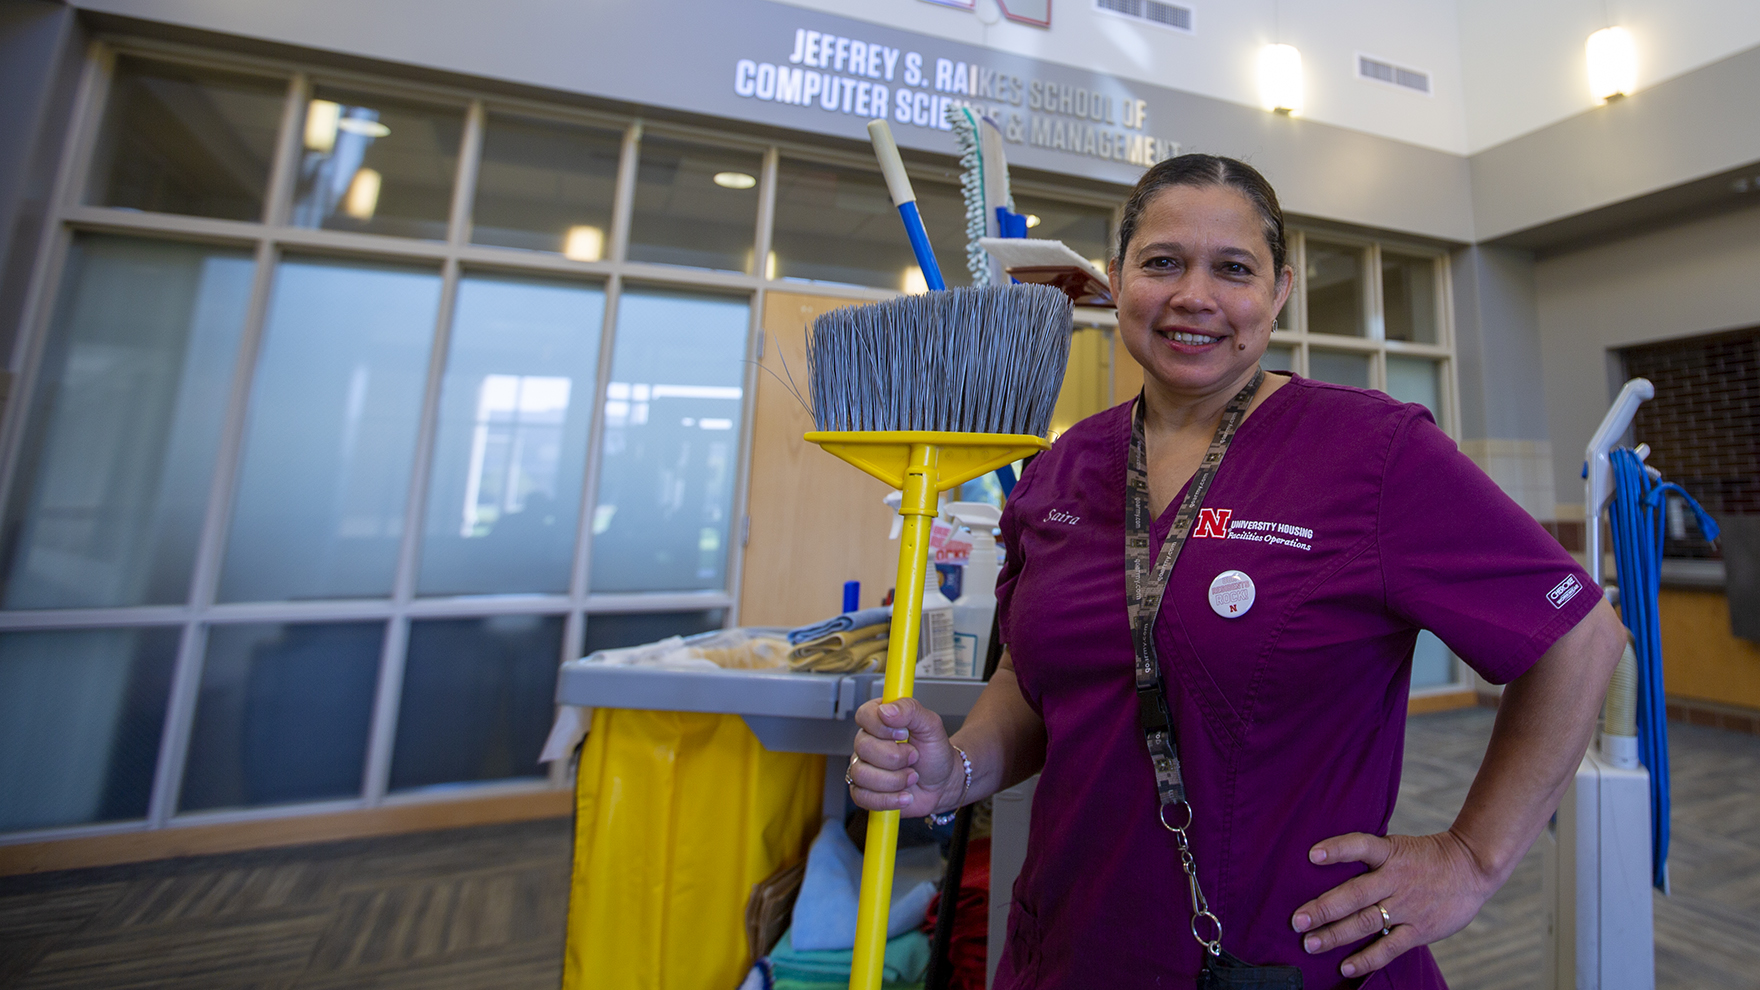 Nebraska's Saira Bautista de Preciado stands proudly, holding a broom, in Kauffman Hall. Bautista de Preciado has worked as a custodian in the Raikes School for 10 years and recently received an Employee Service Award for her dedication to the university.